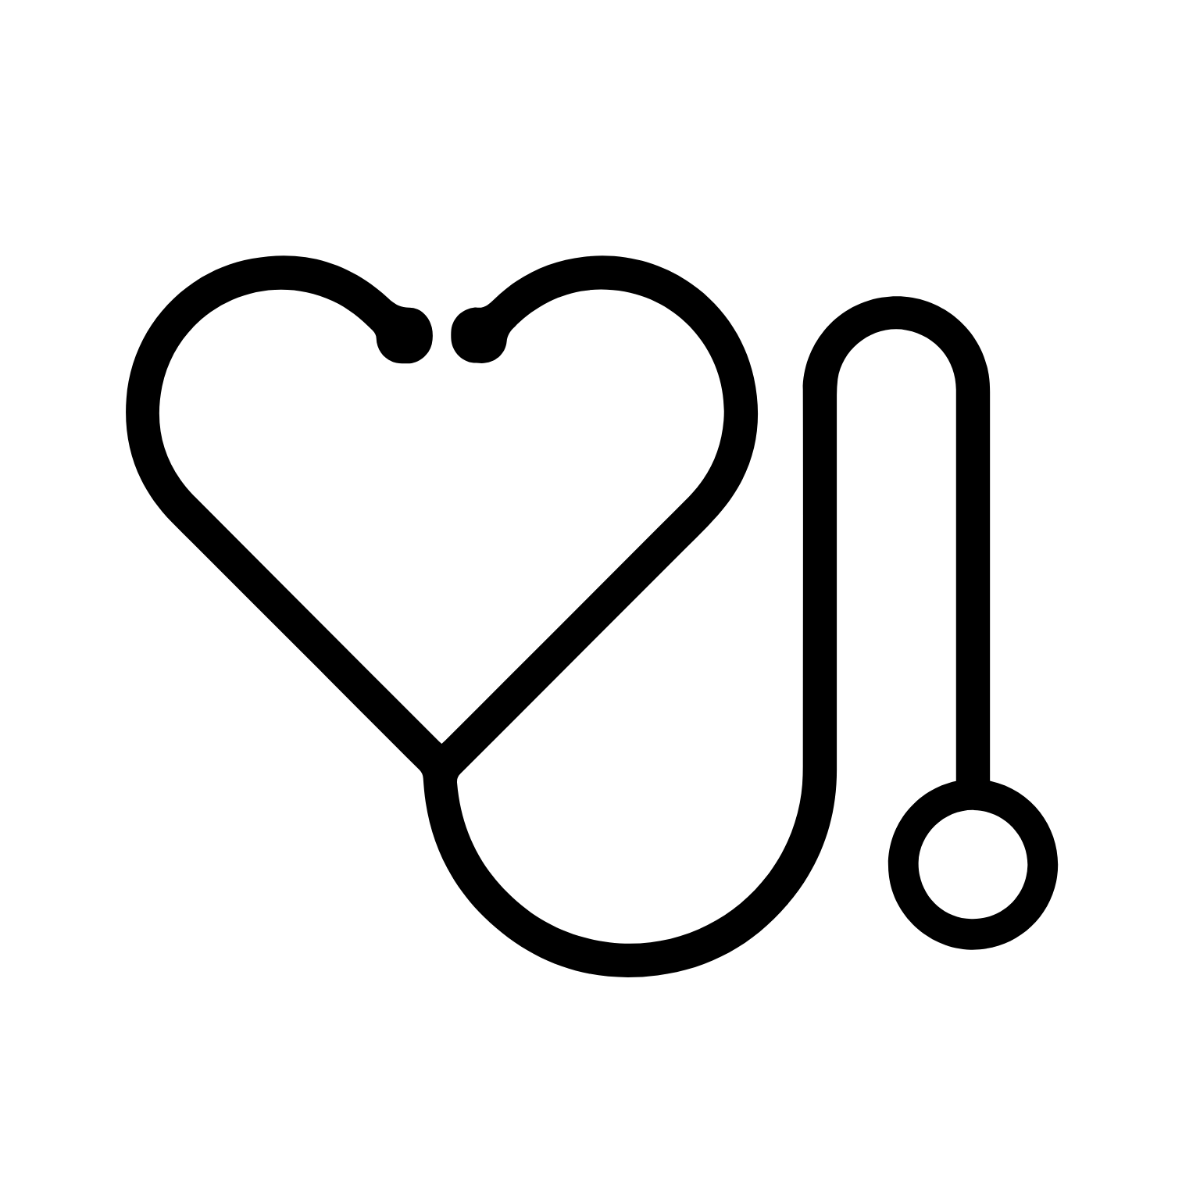 Heart Stethoscope Clipart Black and White Template